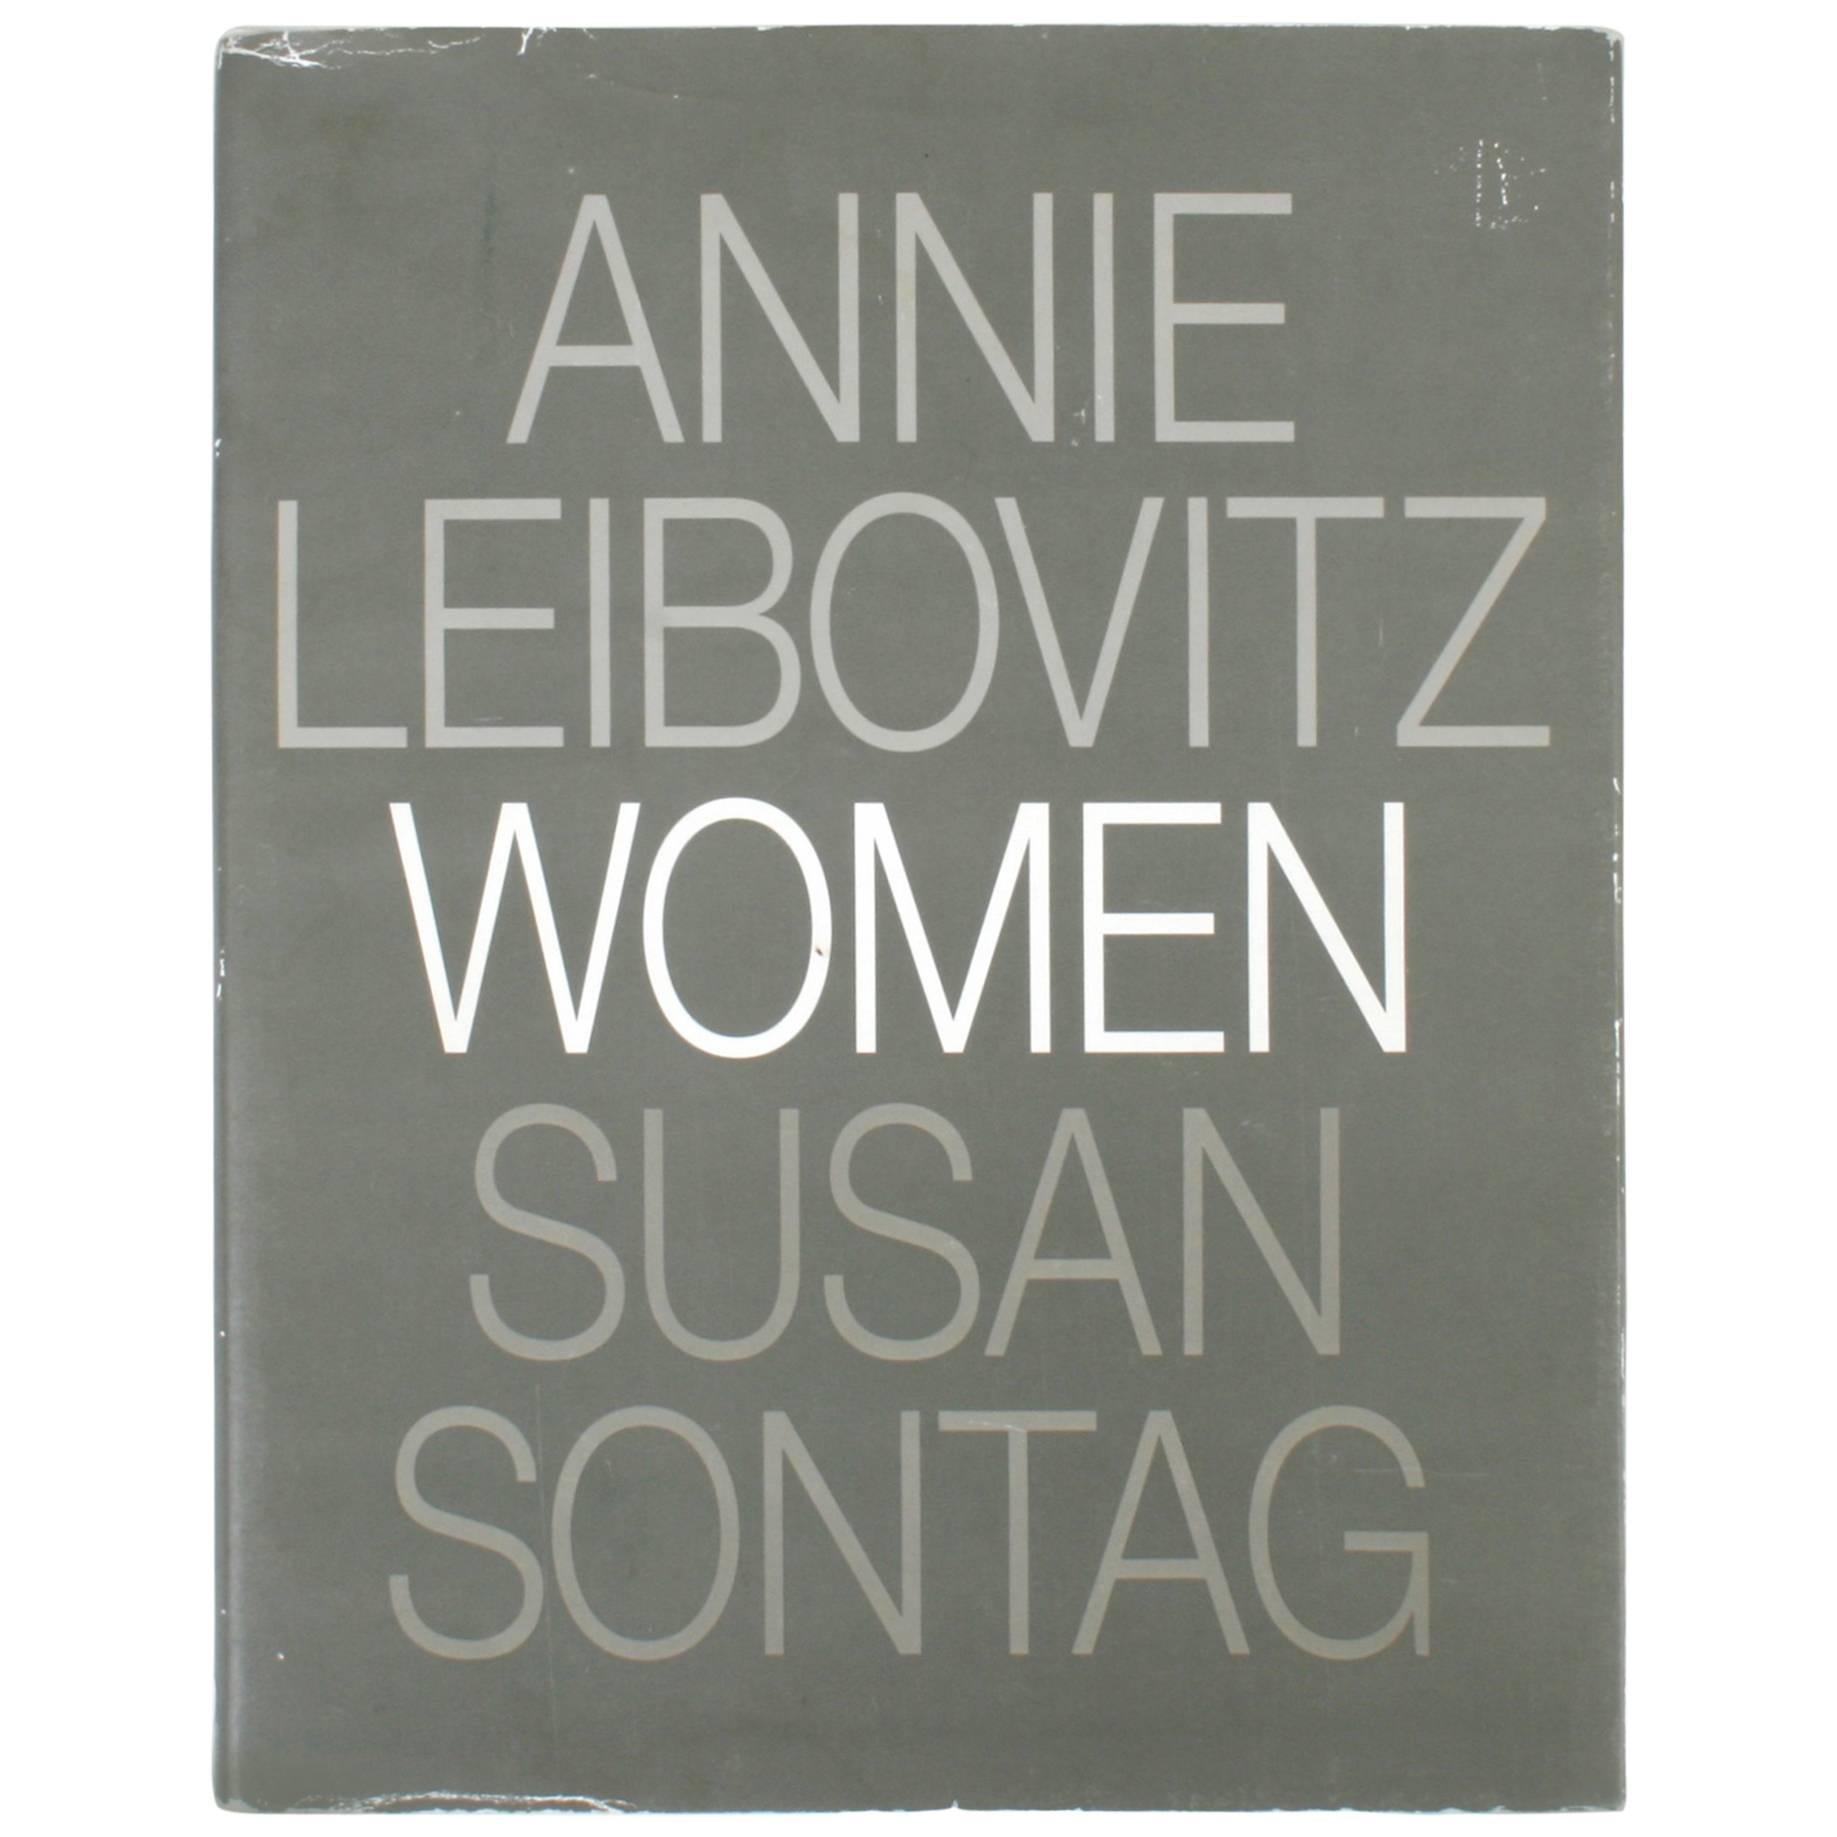 Photographs by Annie Leibovitz, Women by Susan Sontag, First Edition